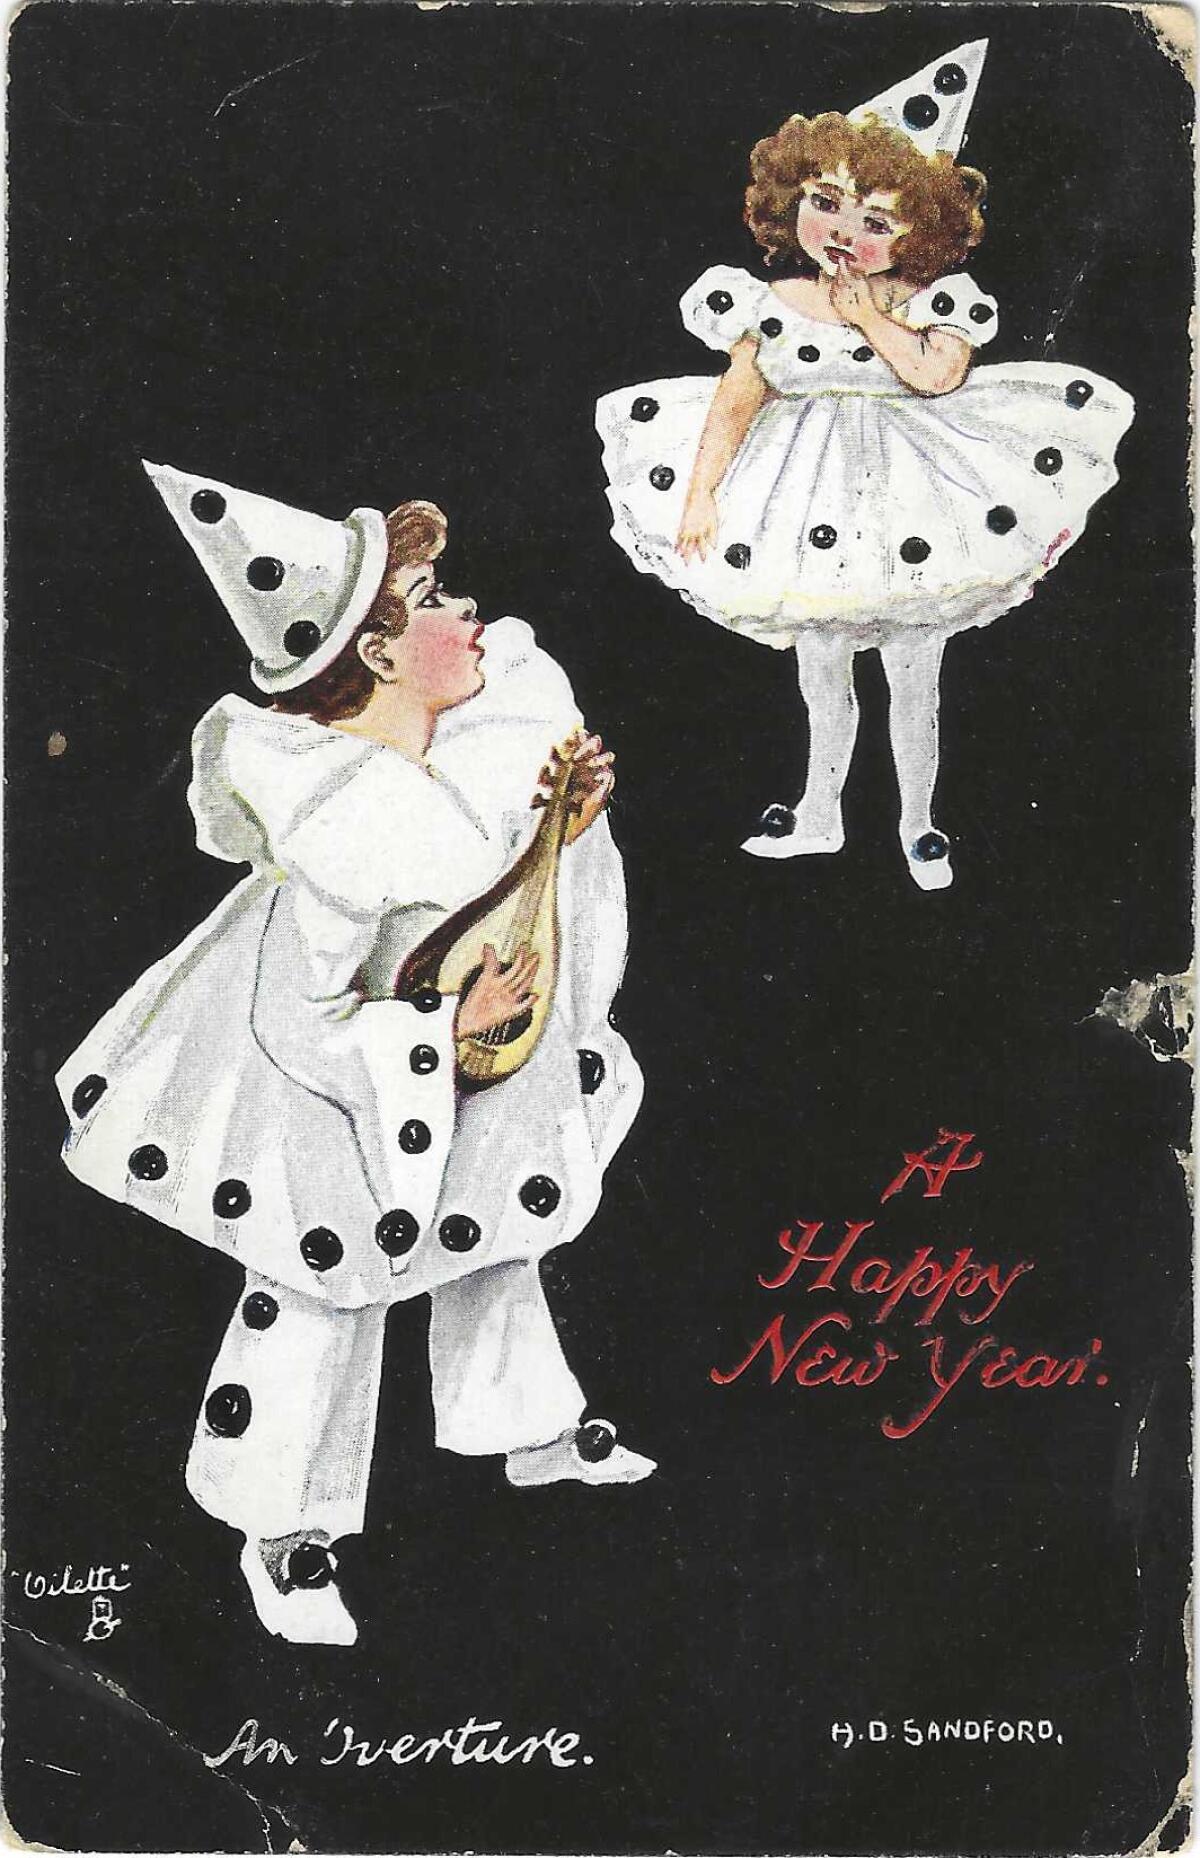 Children in polka-dot outfits on a postcard that says "A Happy New Year."